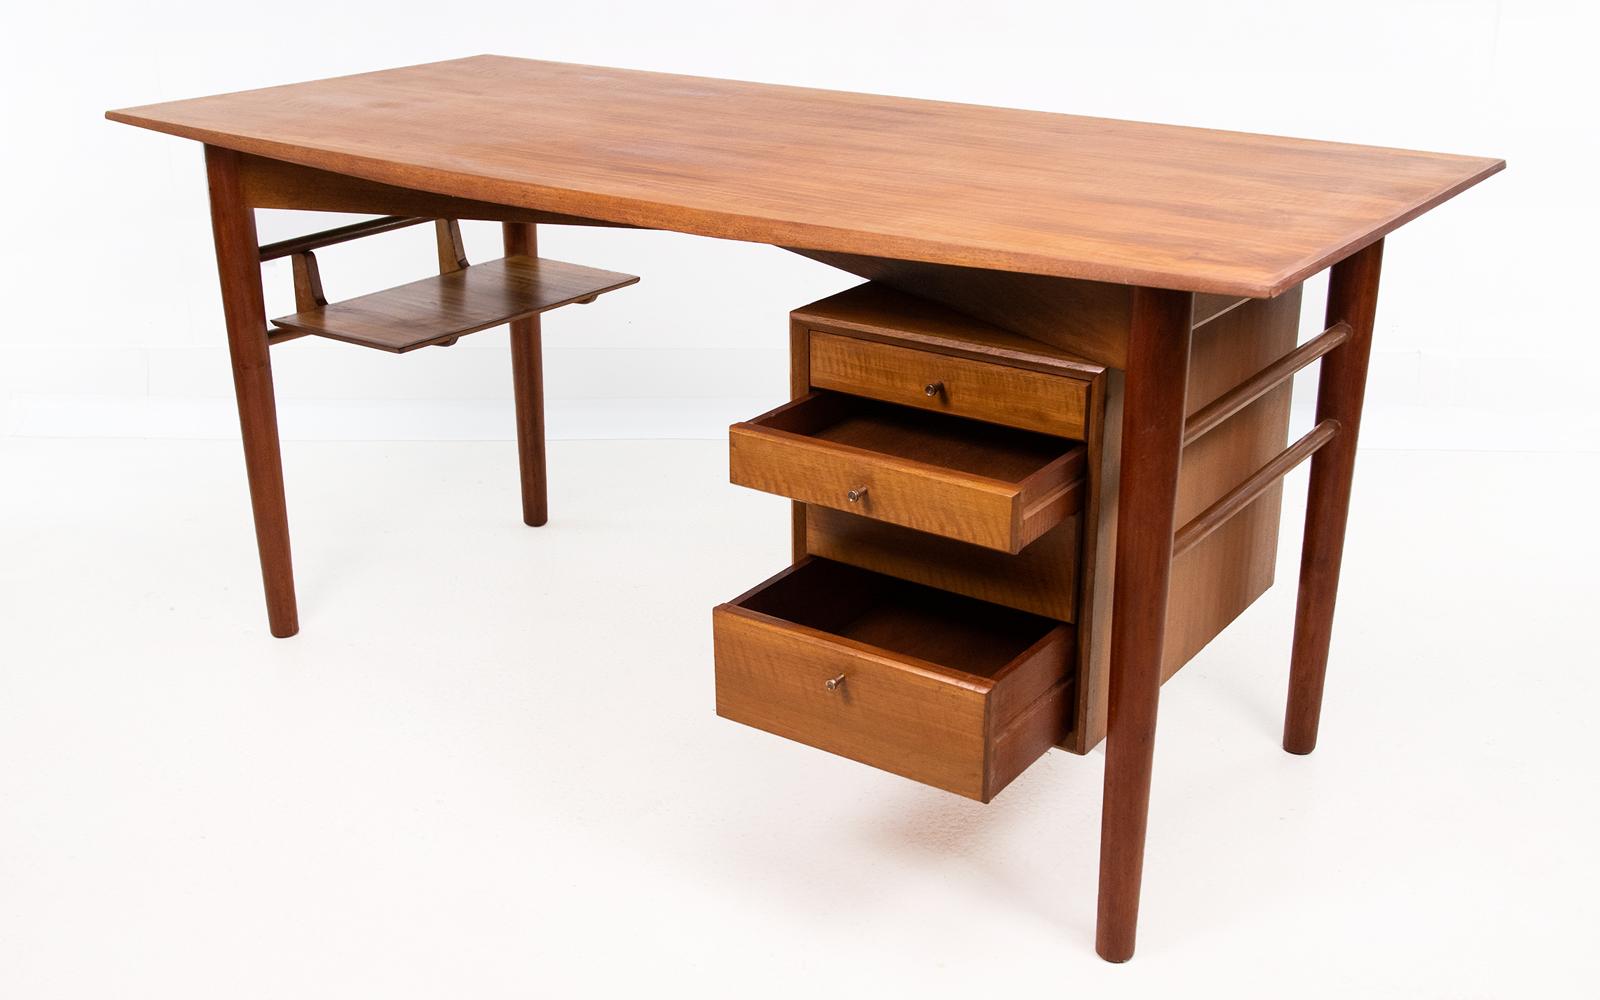 Gordon Russell desk

Mid 20th century walnut and mahogany studio desk, the rectangular top above a floating bank of drawers opposed by an open shelf, raised upon tapering cylindrical legs.

Designed by Gordon Russell and sold through Heal's of